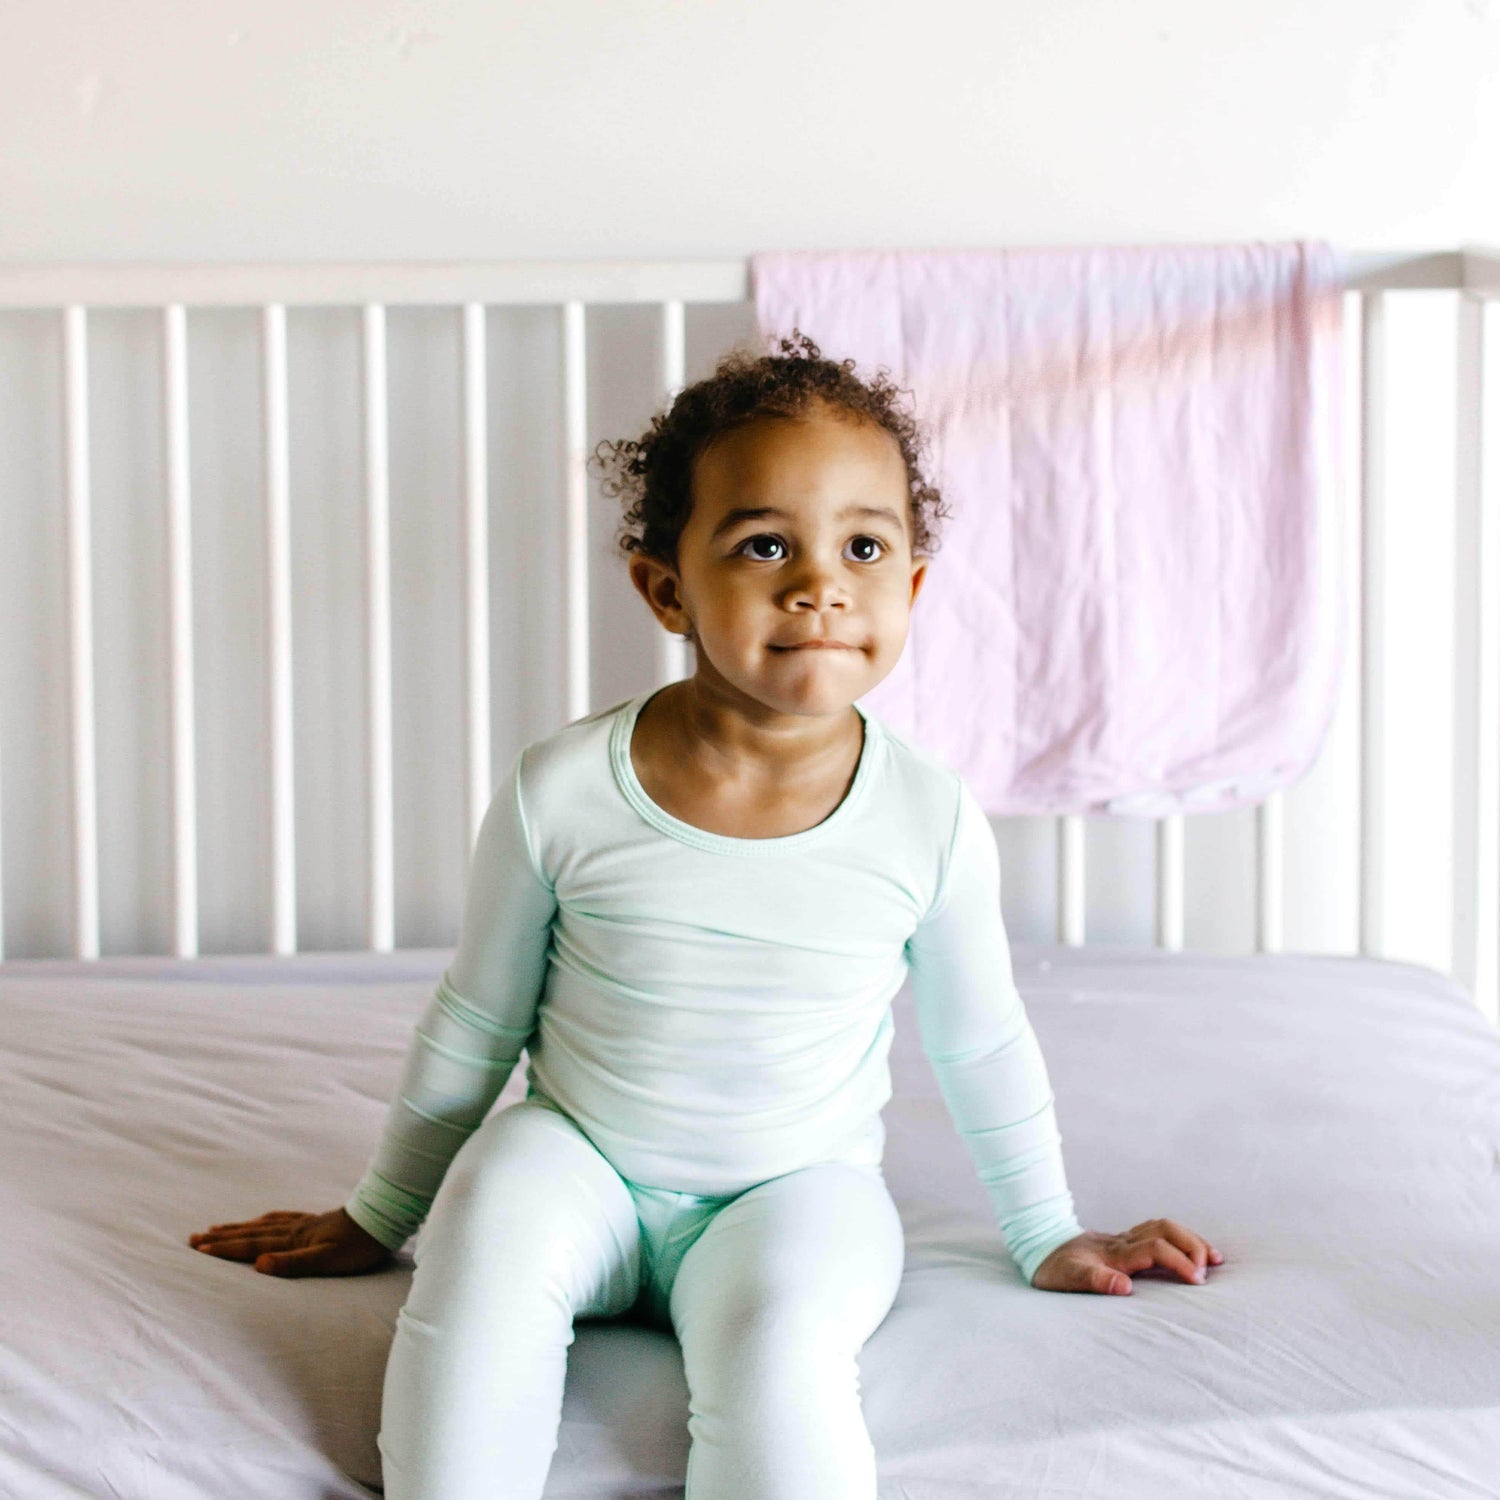 6 Steps to Transition Your Toddler From the Crib to a Bed